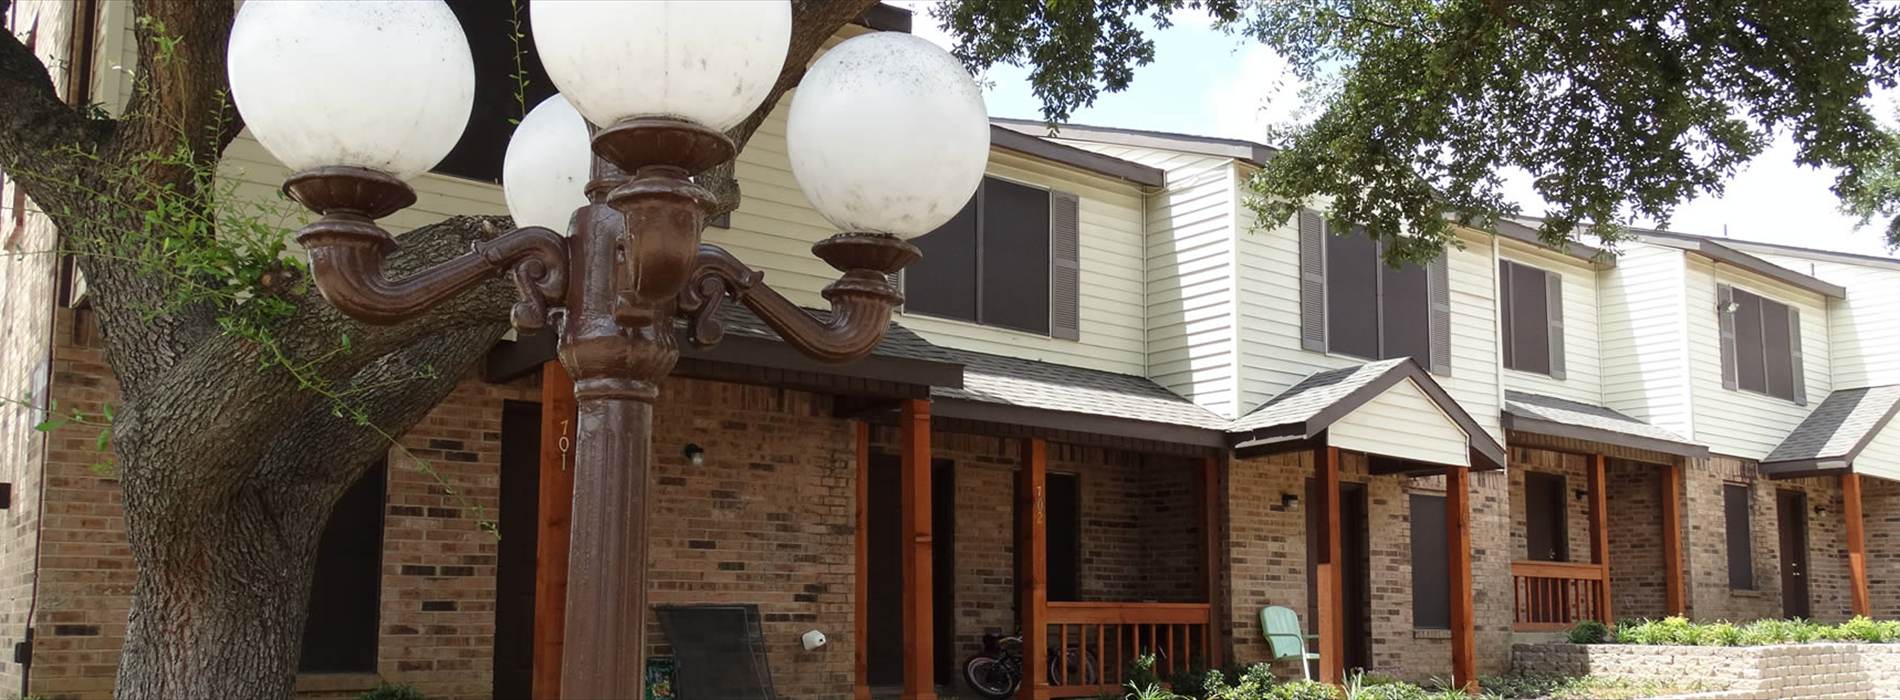 Schedule a tour of Round Rock Townhomes in Arlington, Texas